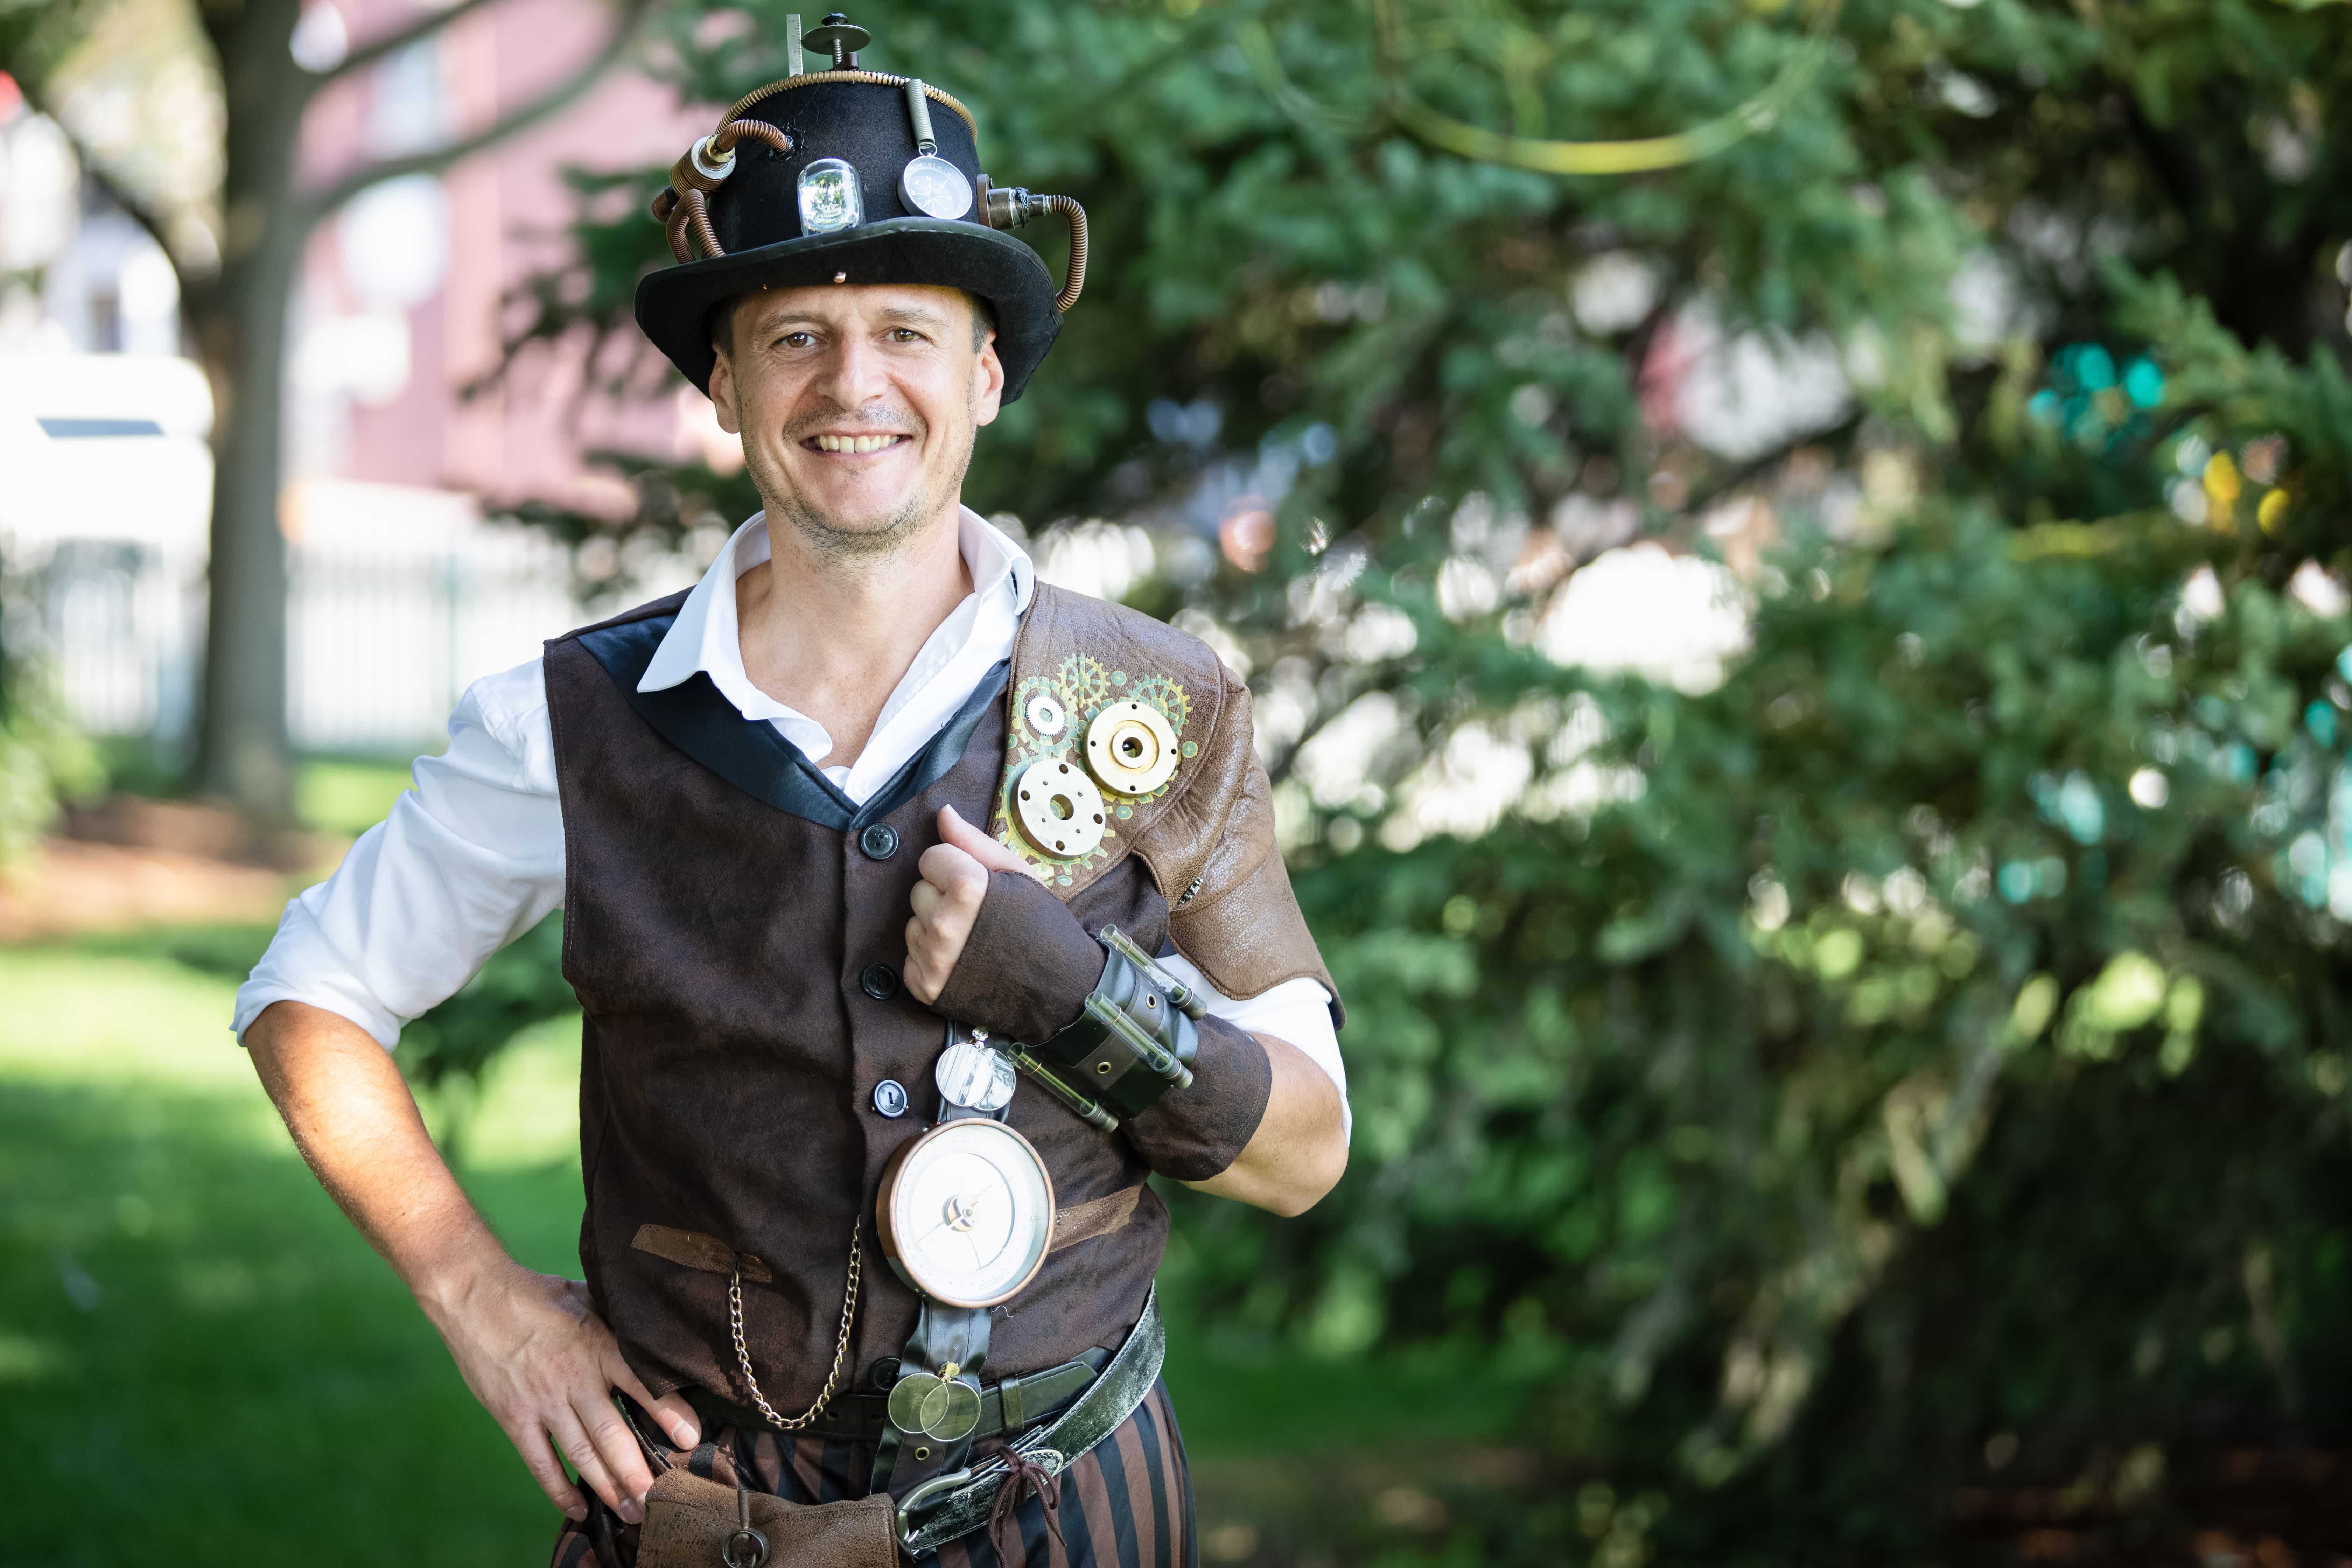 Amherstburg's mayor shows off his Steampunk costume for the Uncommon Festival